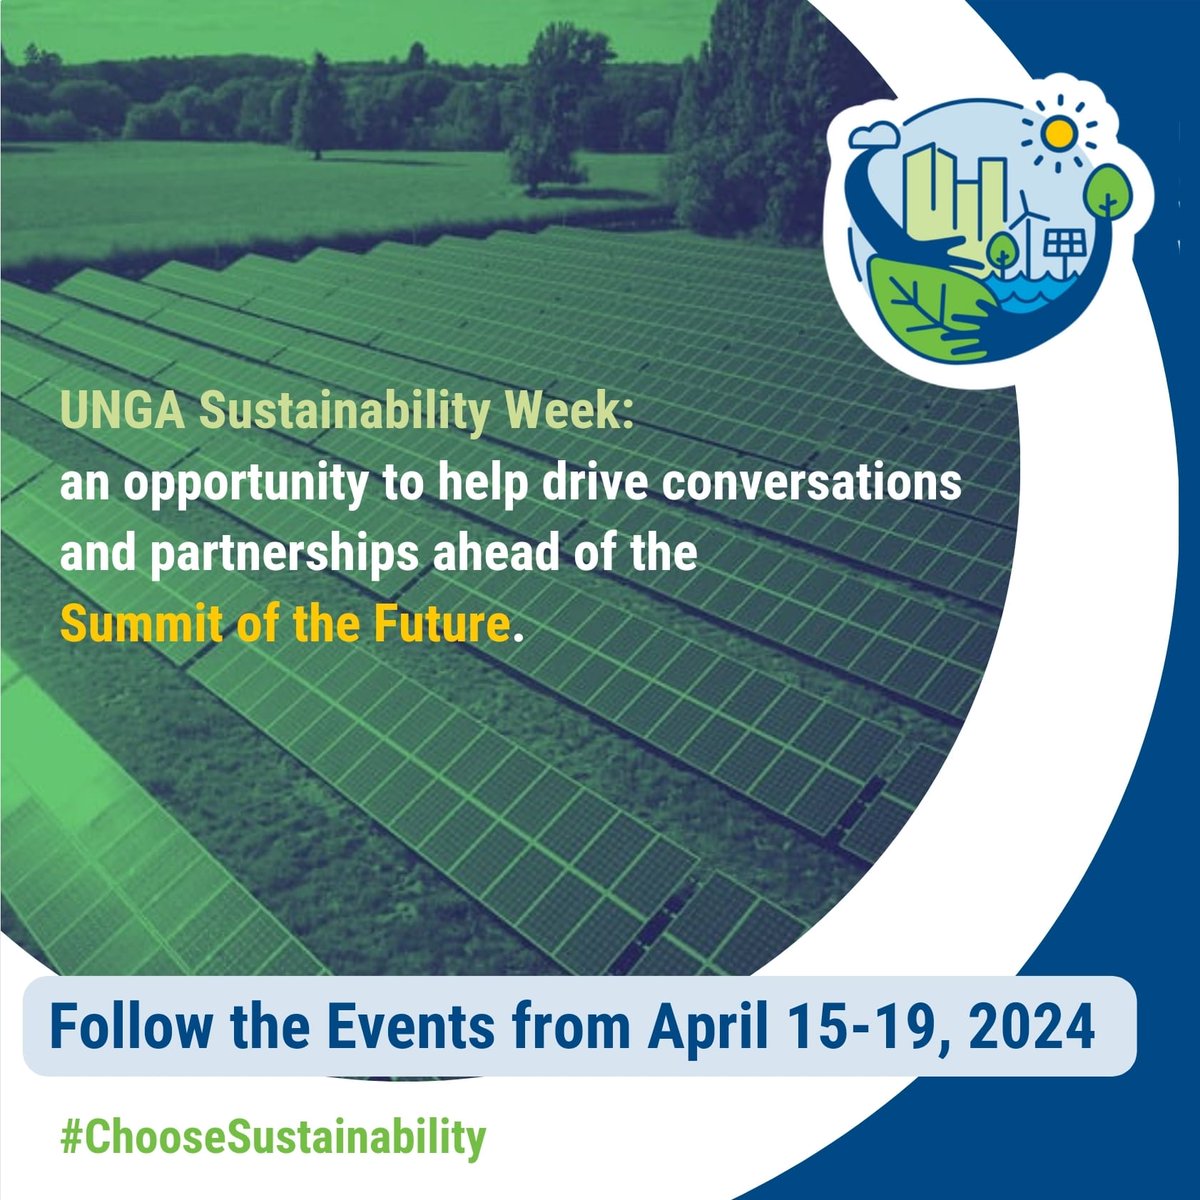 Excited for #UNGASustainabilityWeek! Looking forward to insightful discussions on critical sectors for sustainable development. Let's forge partnerships crucial for a successful Summit of the Future. Let's drive change together! 🌍💡 #SotF #ChooseSustainability